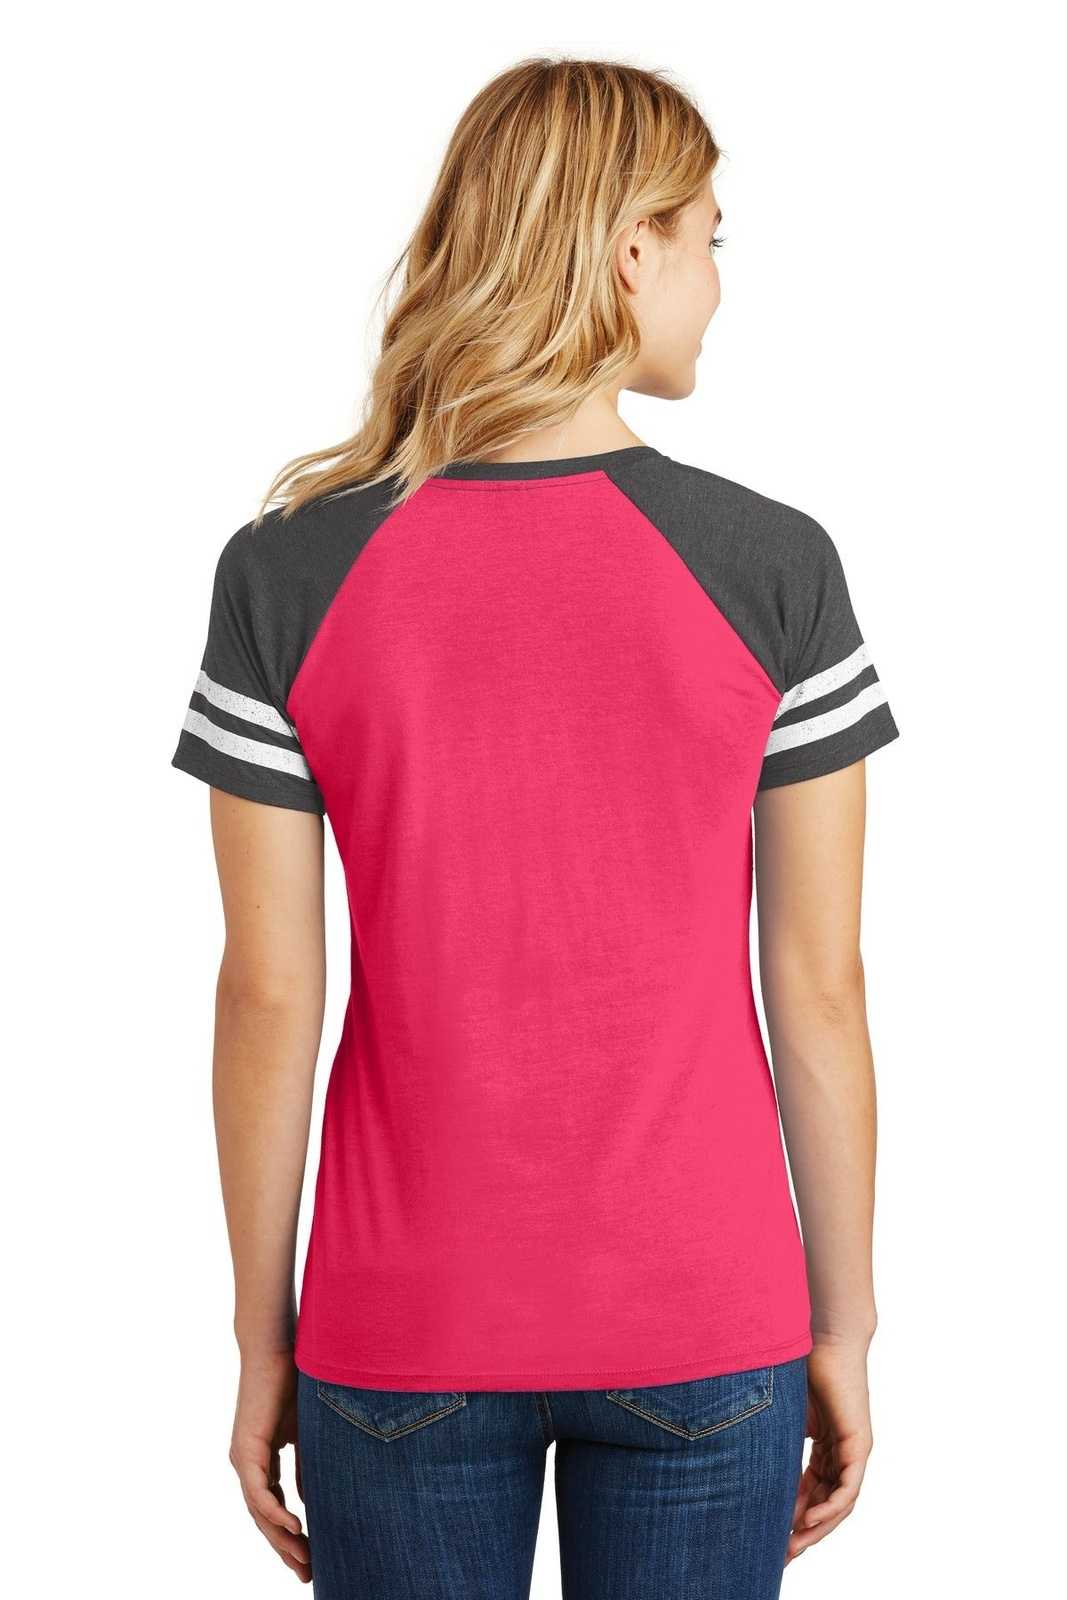 District DM476 Women's Game V-Neck Tee - Heathered Watermelon Heathered Charcoal - HIT a Double - 1